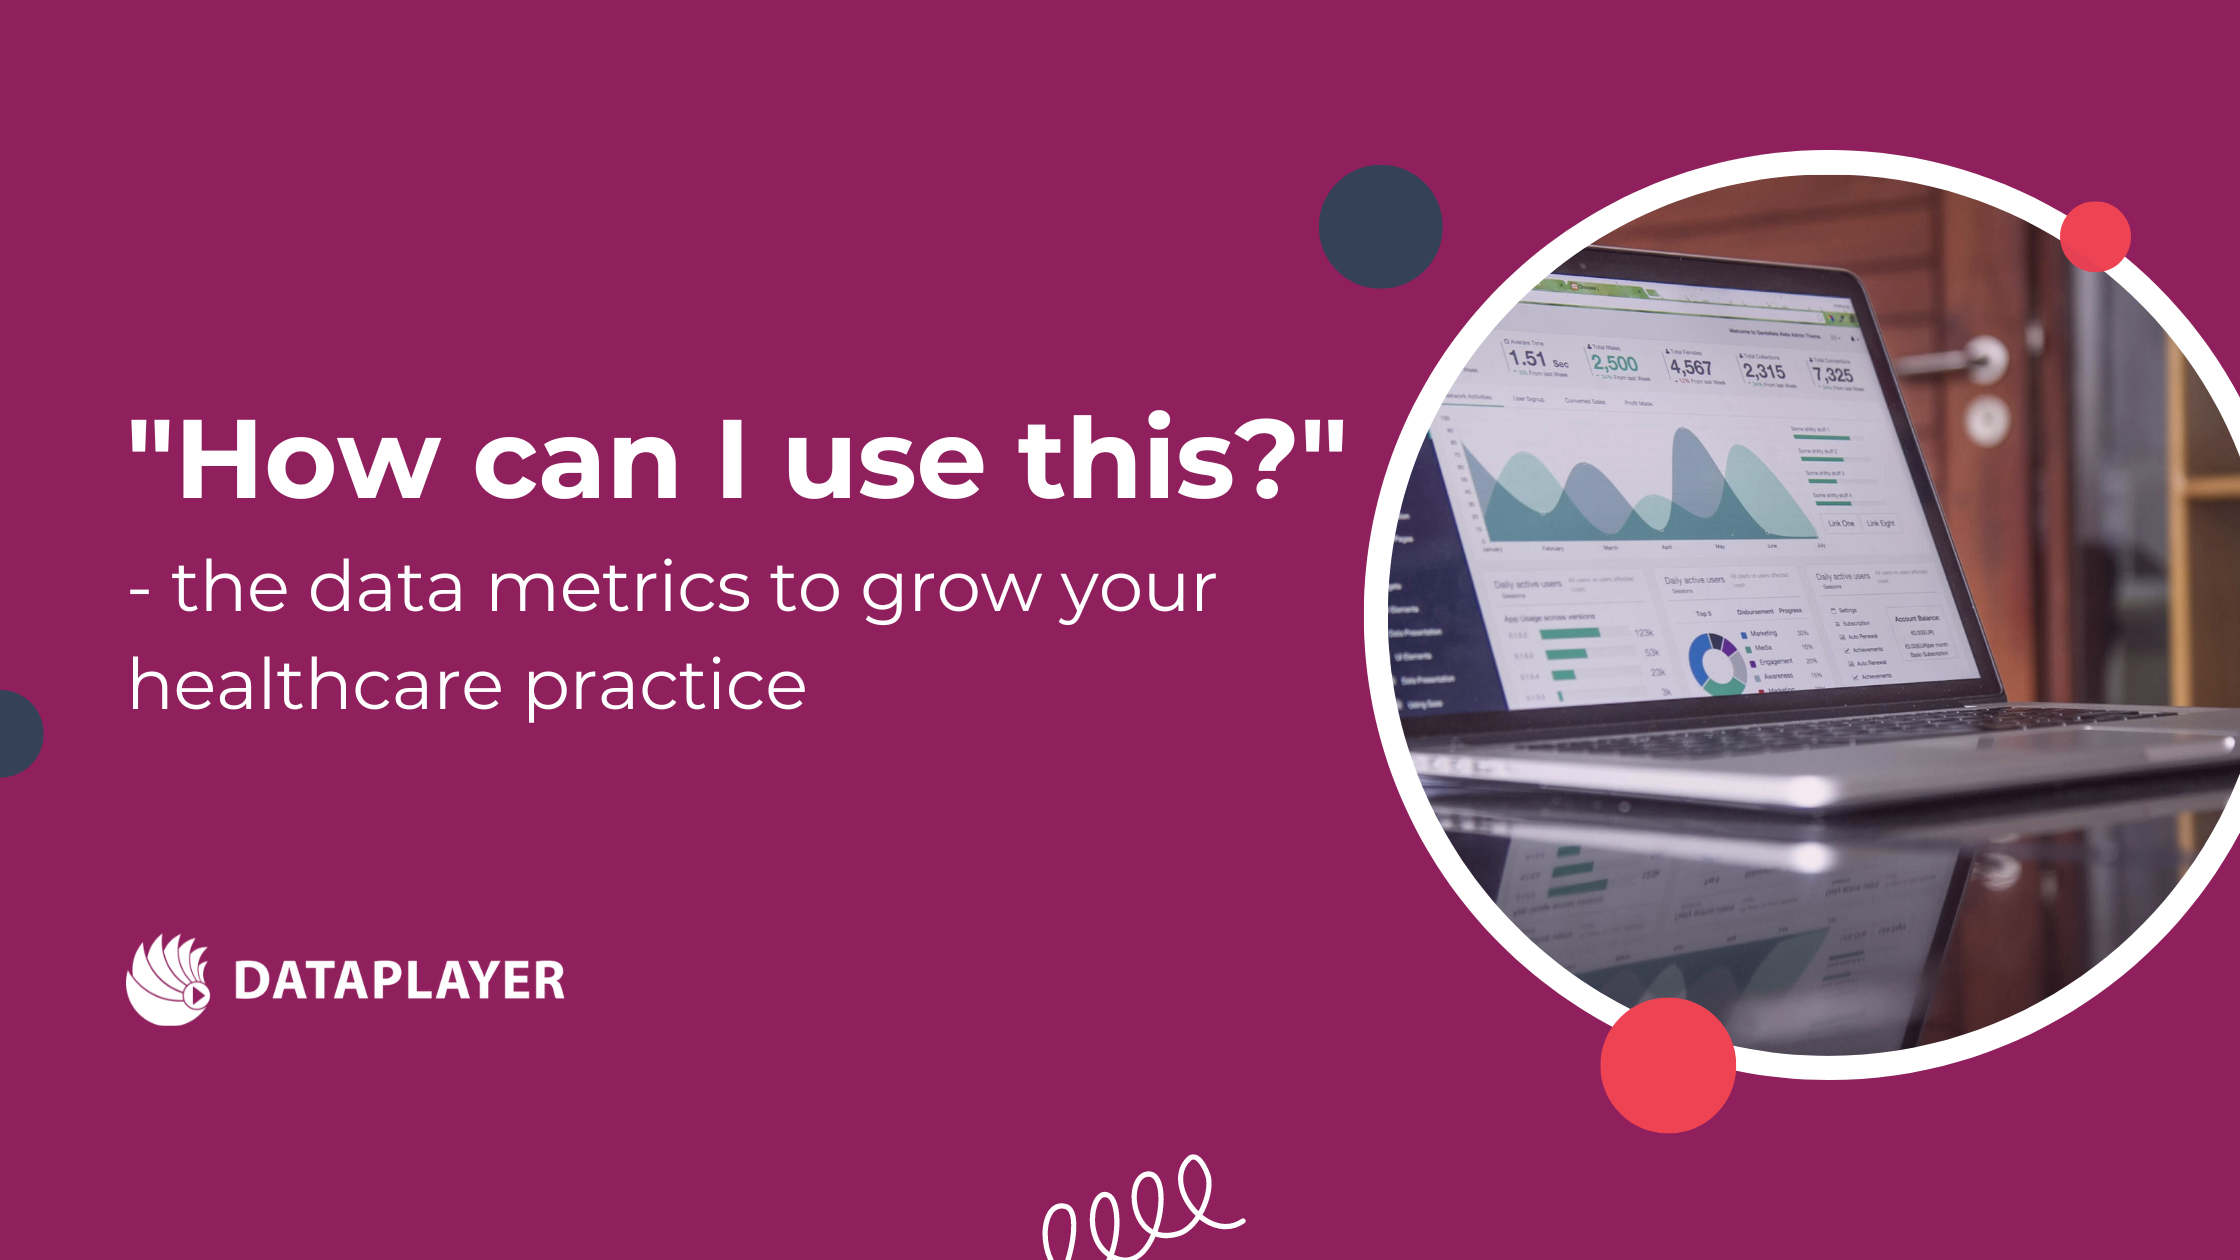 “How can I use this?” – the data metrics to grow your healthcare practice